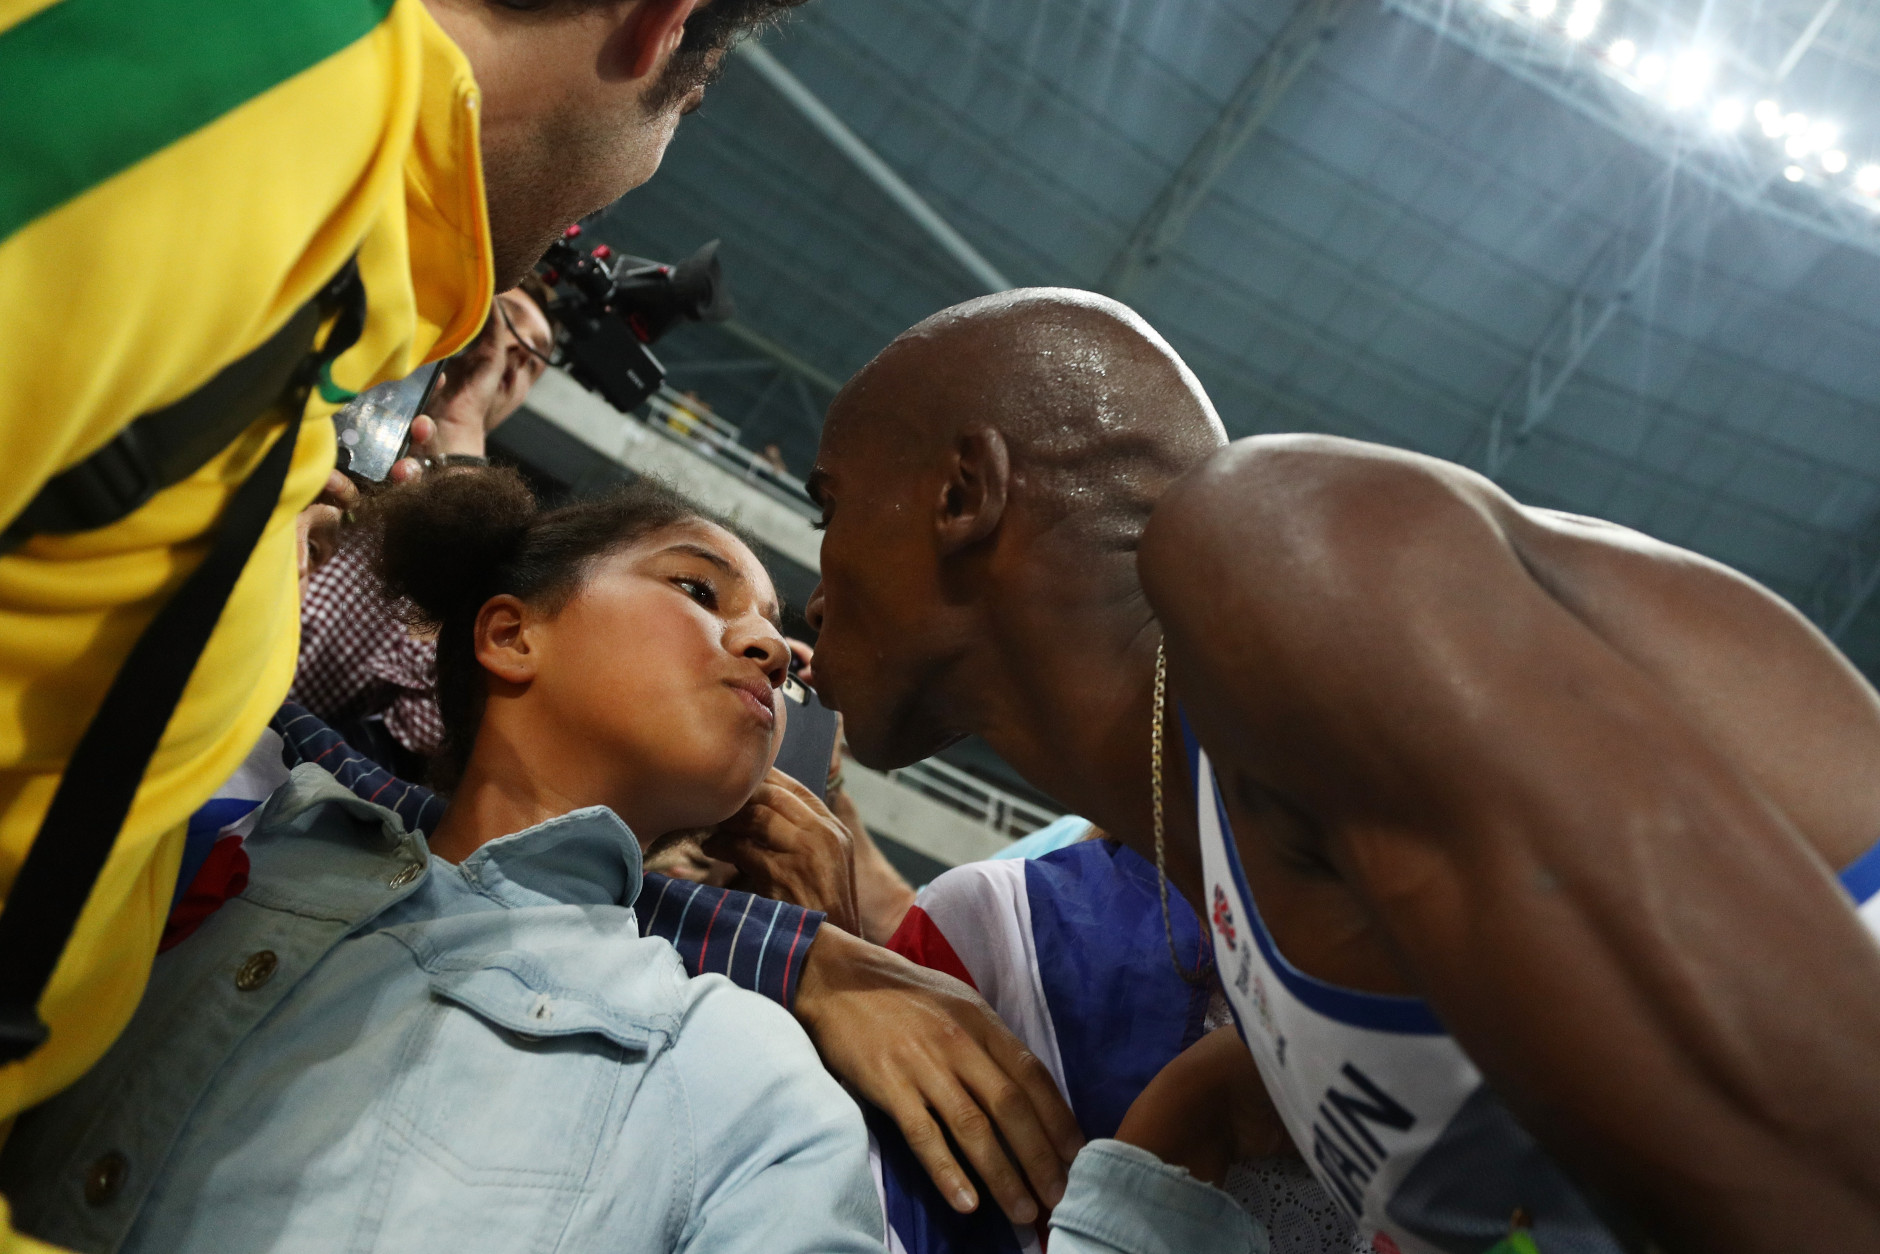 RIO DE JANEIRO, BRAZIL - AUGUST 20:  Mohamed Farah of Great Britain celebrates with daughter Rihanna after winning gold in the Men's 5000 meter Final on Day 15 of the Rio 2016 Olympic Games at the Olympic Stadium on August 20, 2016 in Rio de Janeiro, Brazil.  (Photo by Patrick Smith/Getty Images)